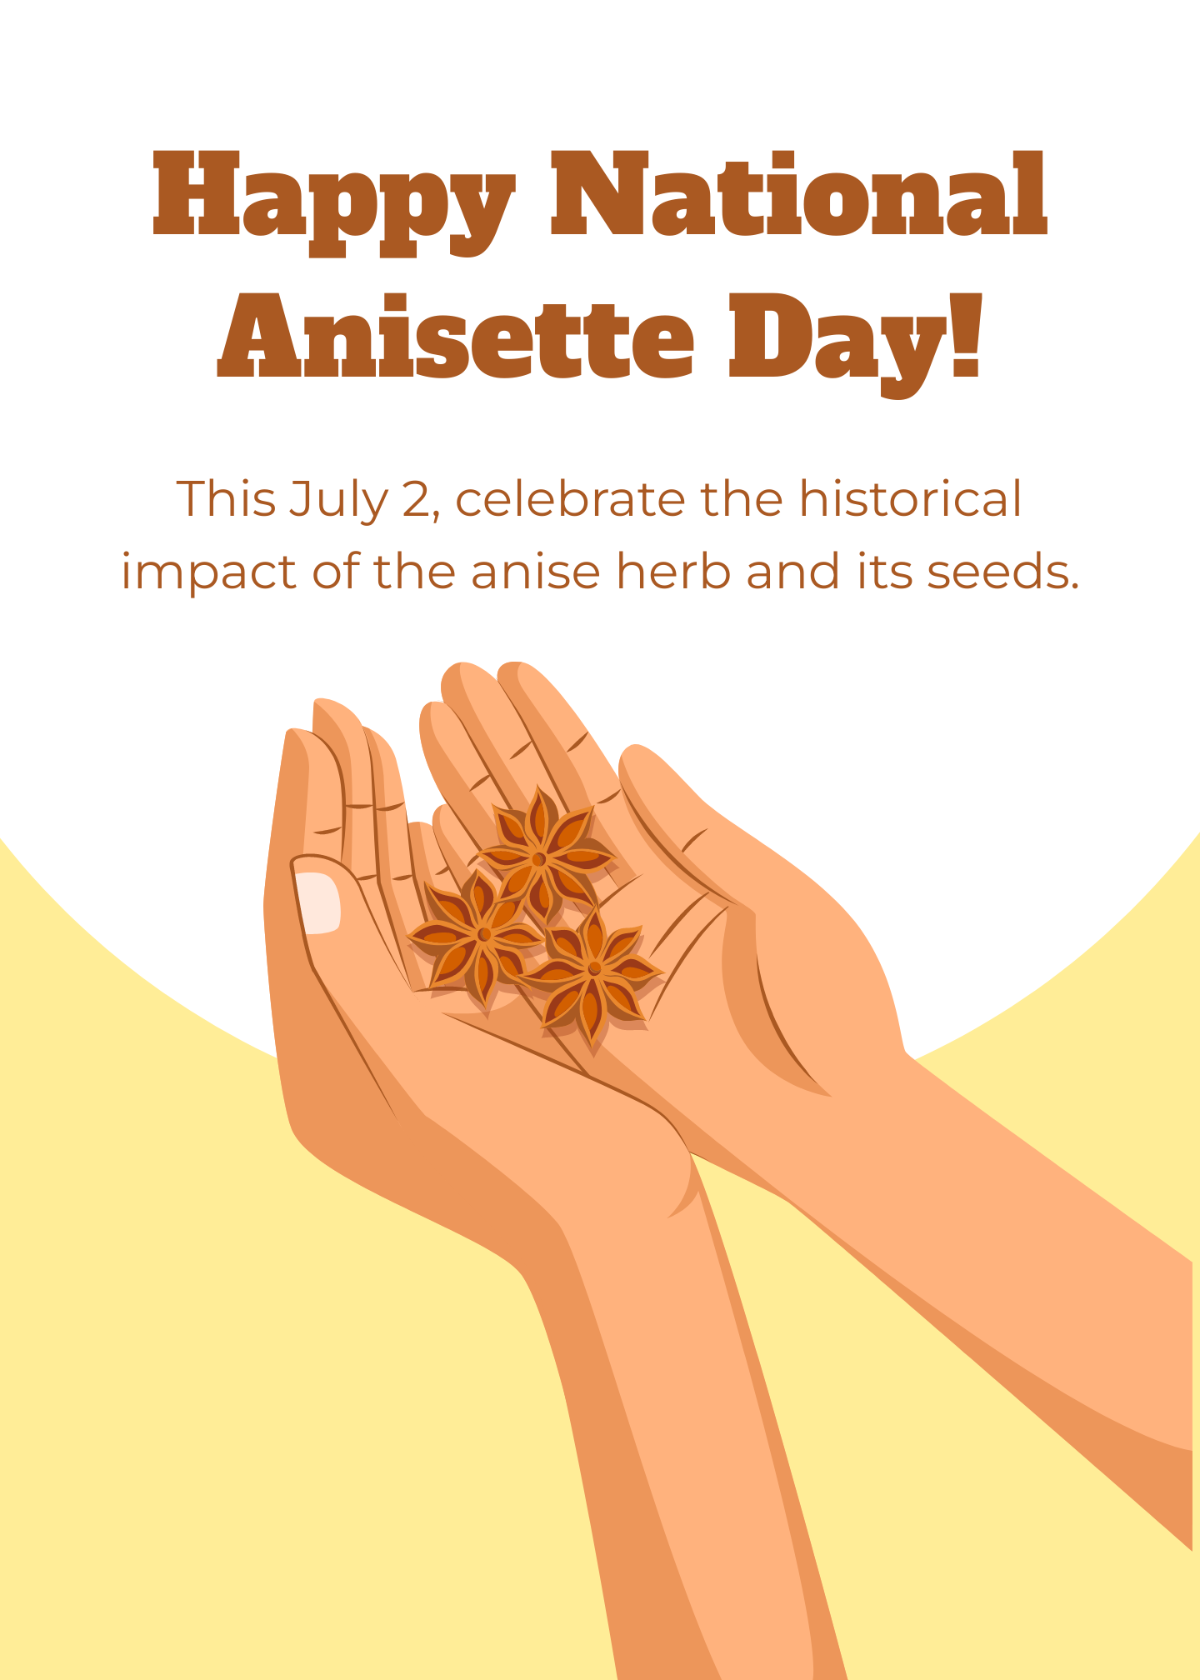 National Anisette Day Greeting Card Template